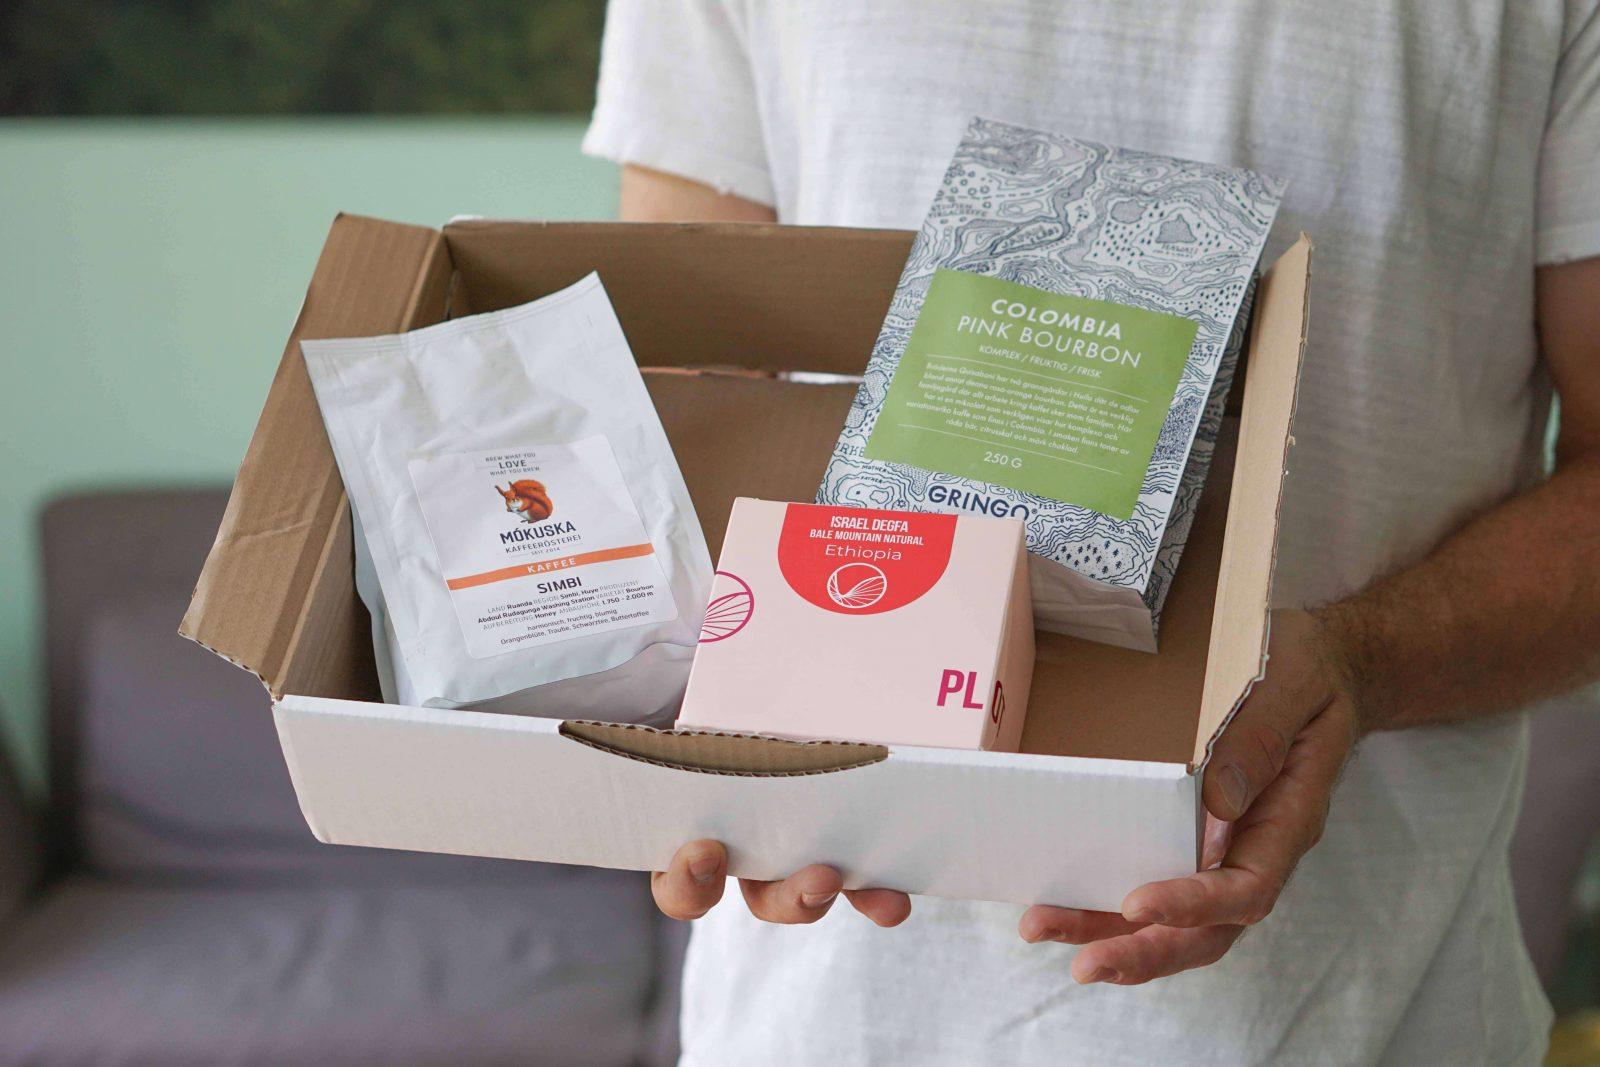 Best coffee subscription Europe - September 2020 box